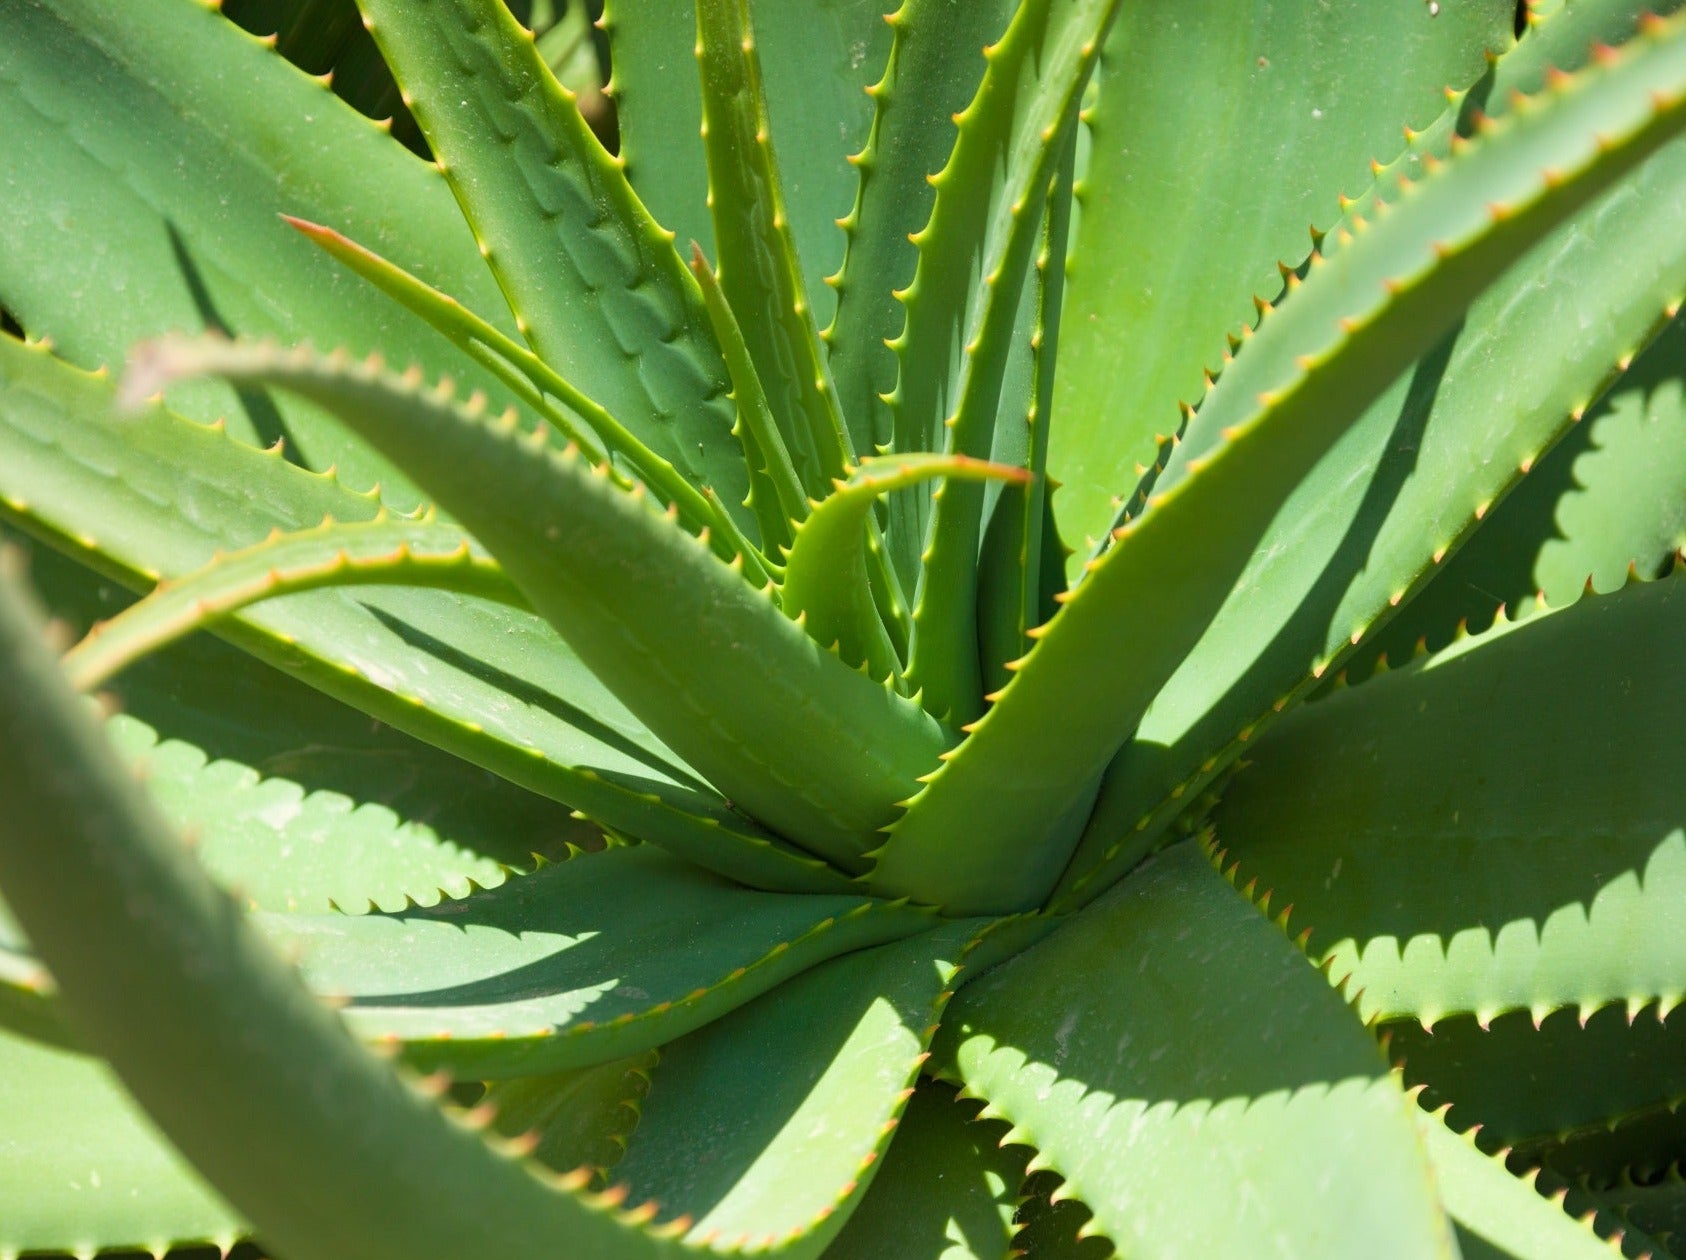 Aloe Vera, a very popular plant with many purposes such as burns. Often referred to as the burn plant.